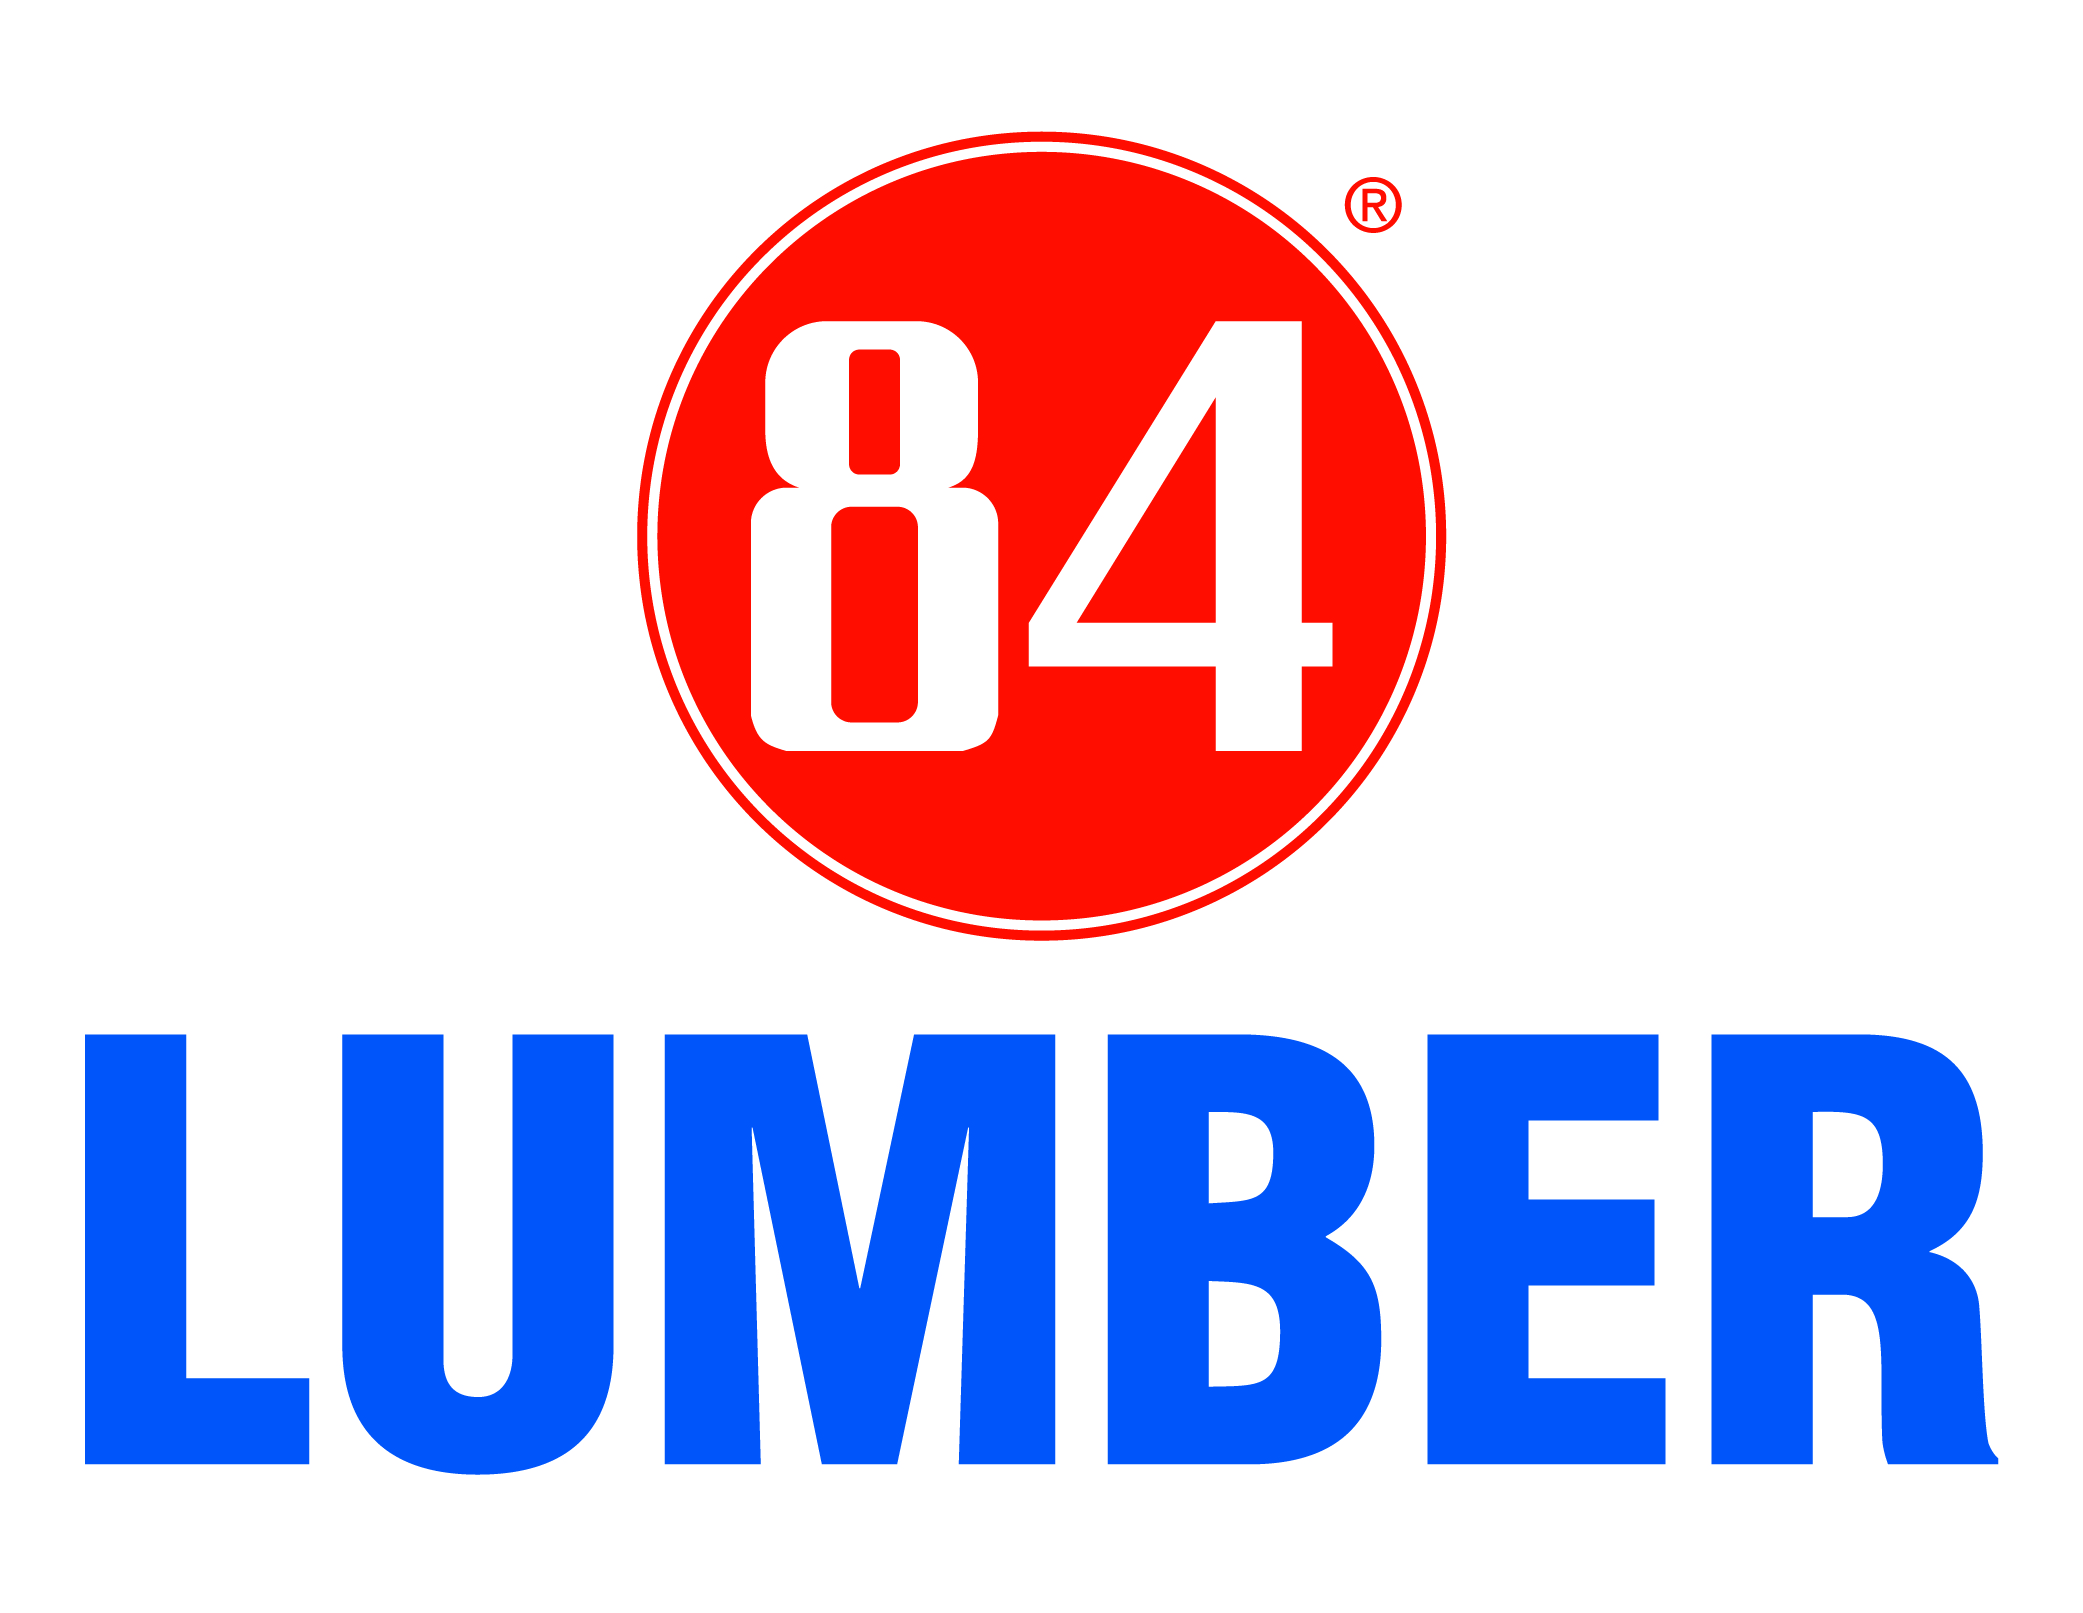 84 Lumber Named To 2019 Inc 5000 List Woodworking Network